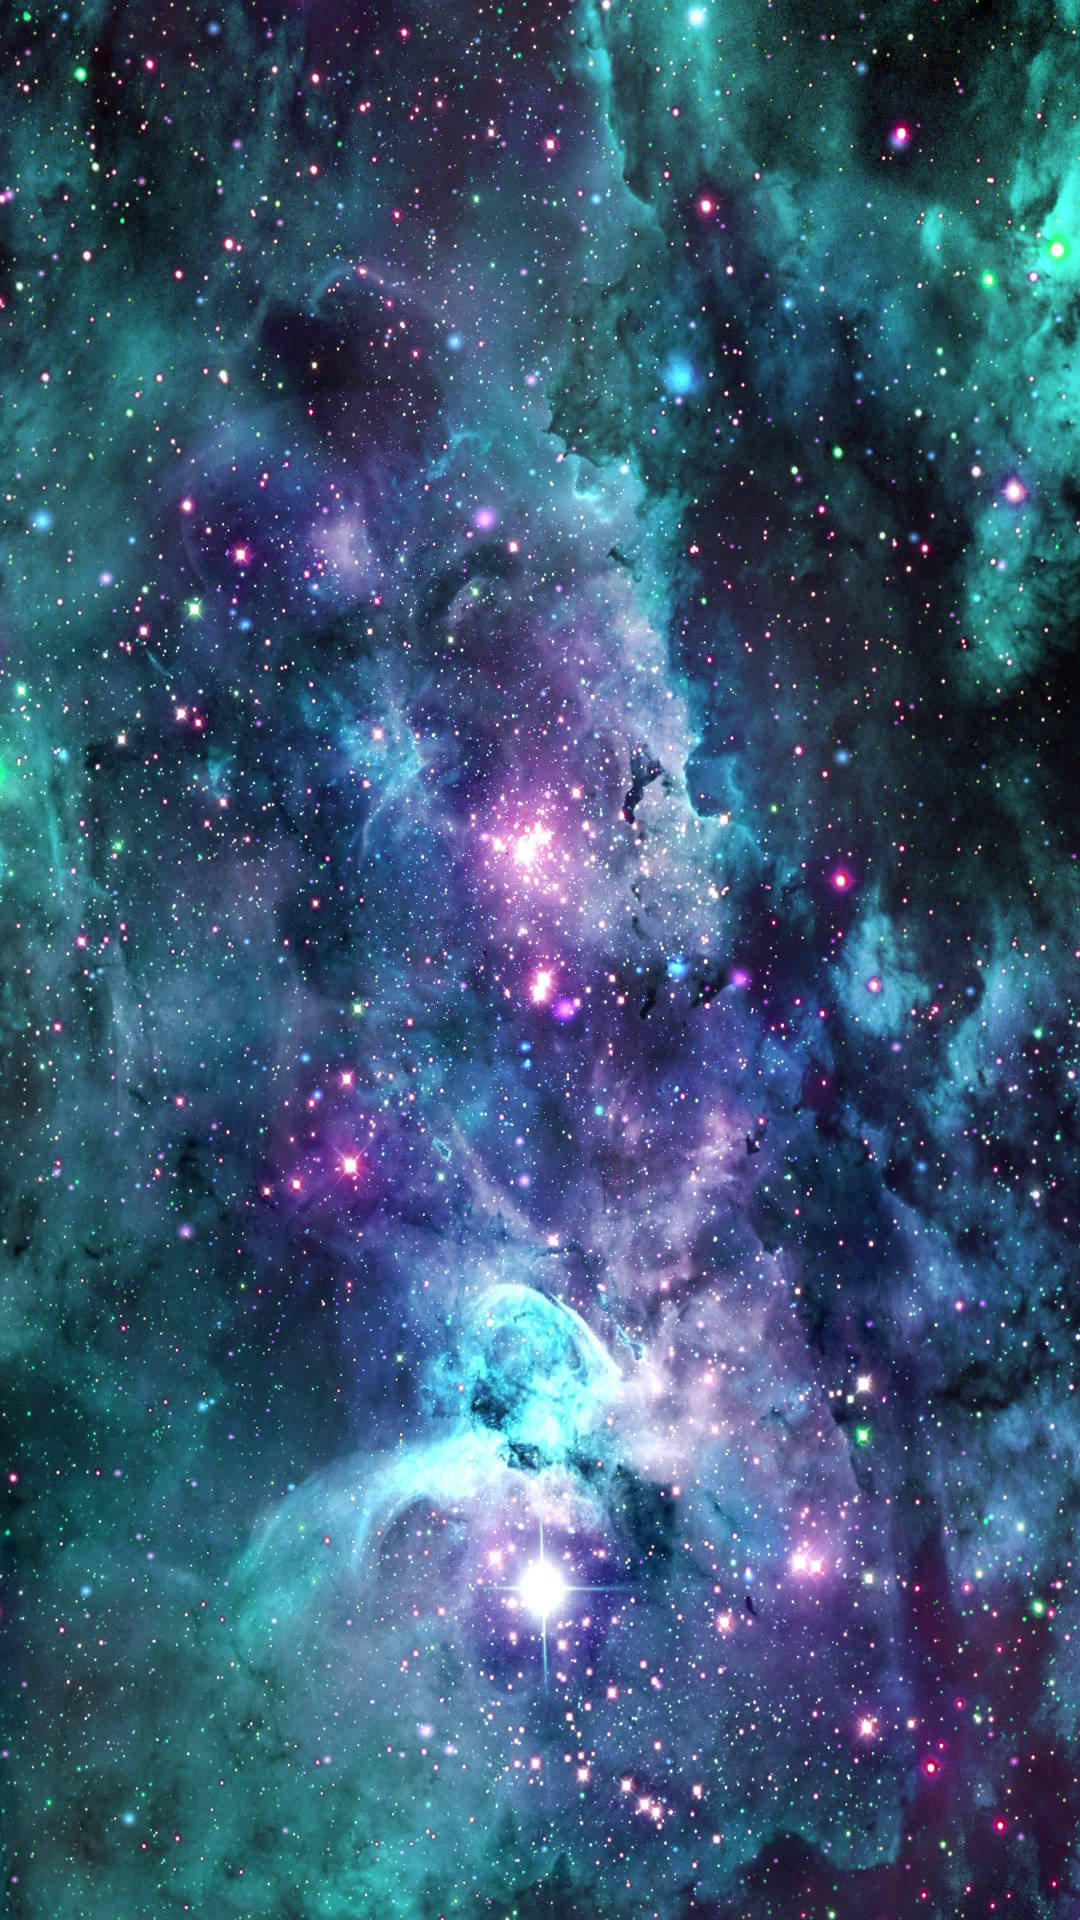 Free Galaxy Live Wallpaper Downloads, [100+] Galaxy Live Wallpapers for FREE  